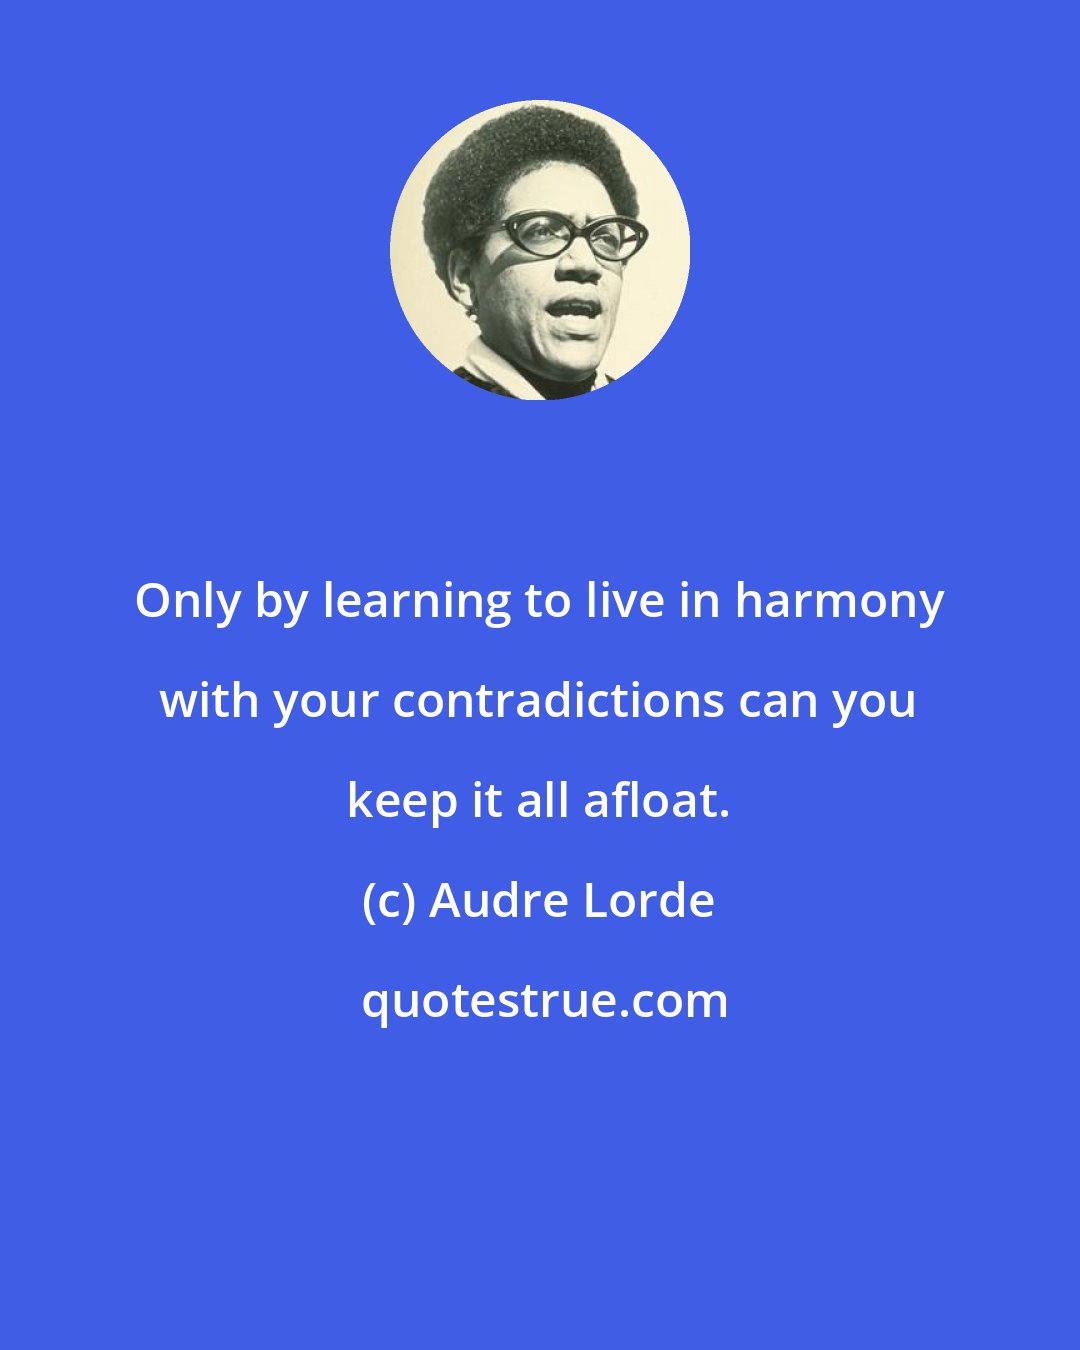 Audre Lorde: Only by learning to live in harmony with your contradictions can you keep it all afloat.